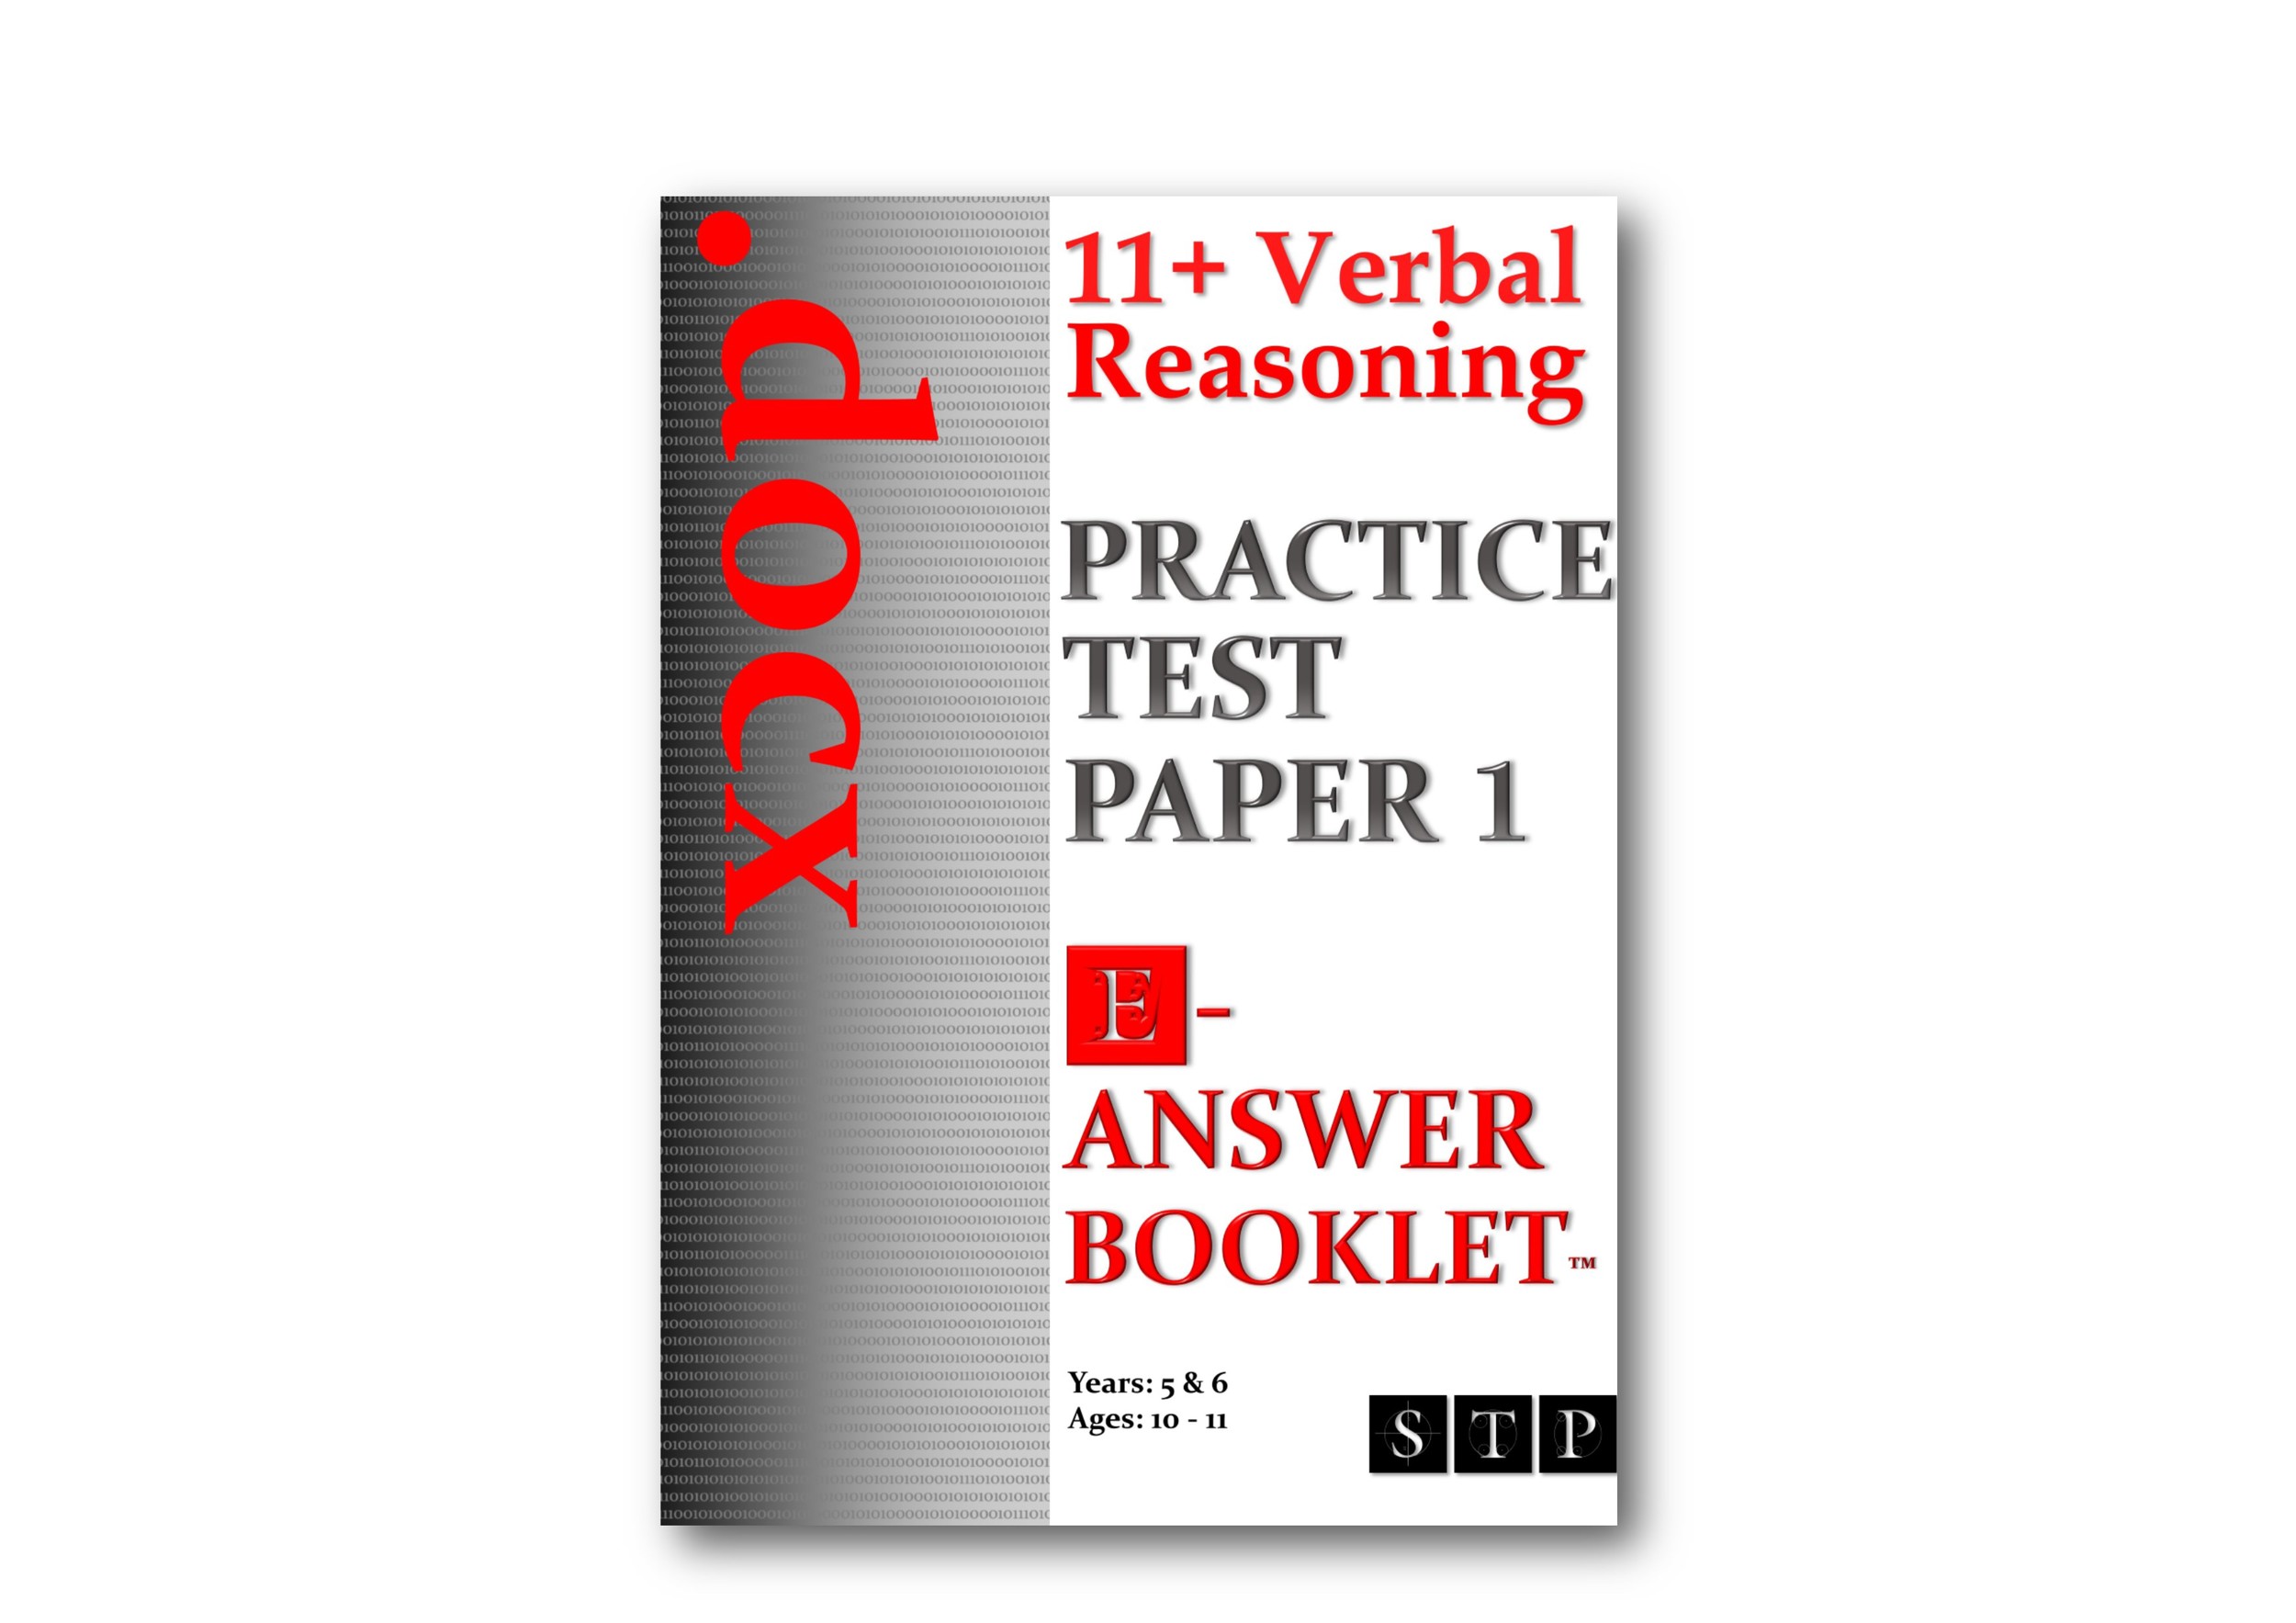 11+ Verbal Reasoning Practice Test Paper 1 (E-Answer Booklet).jpg